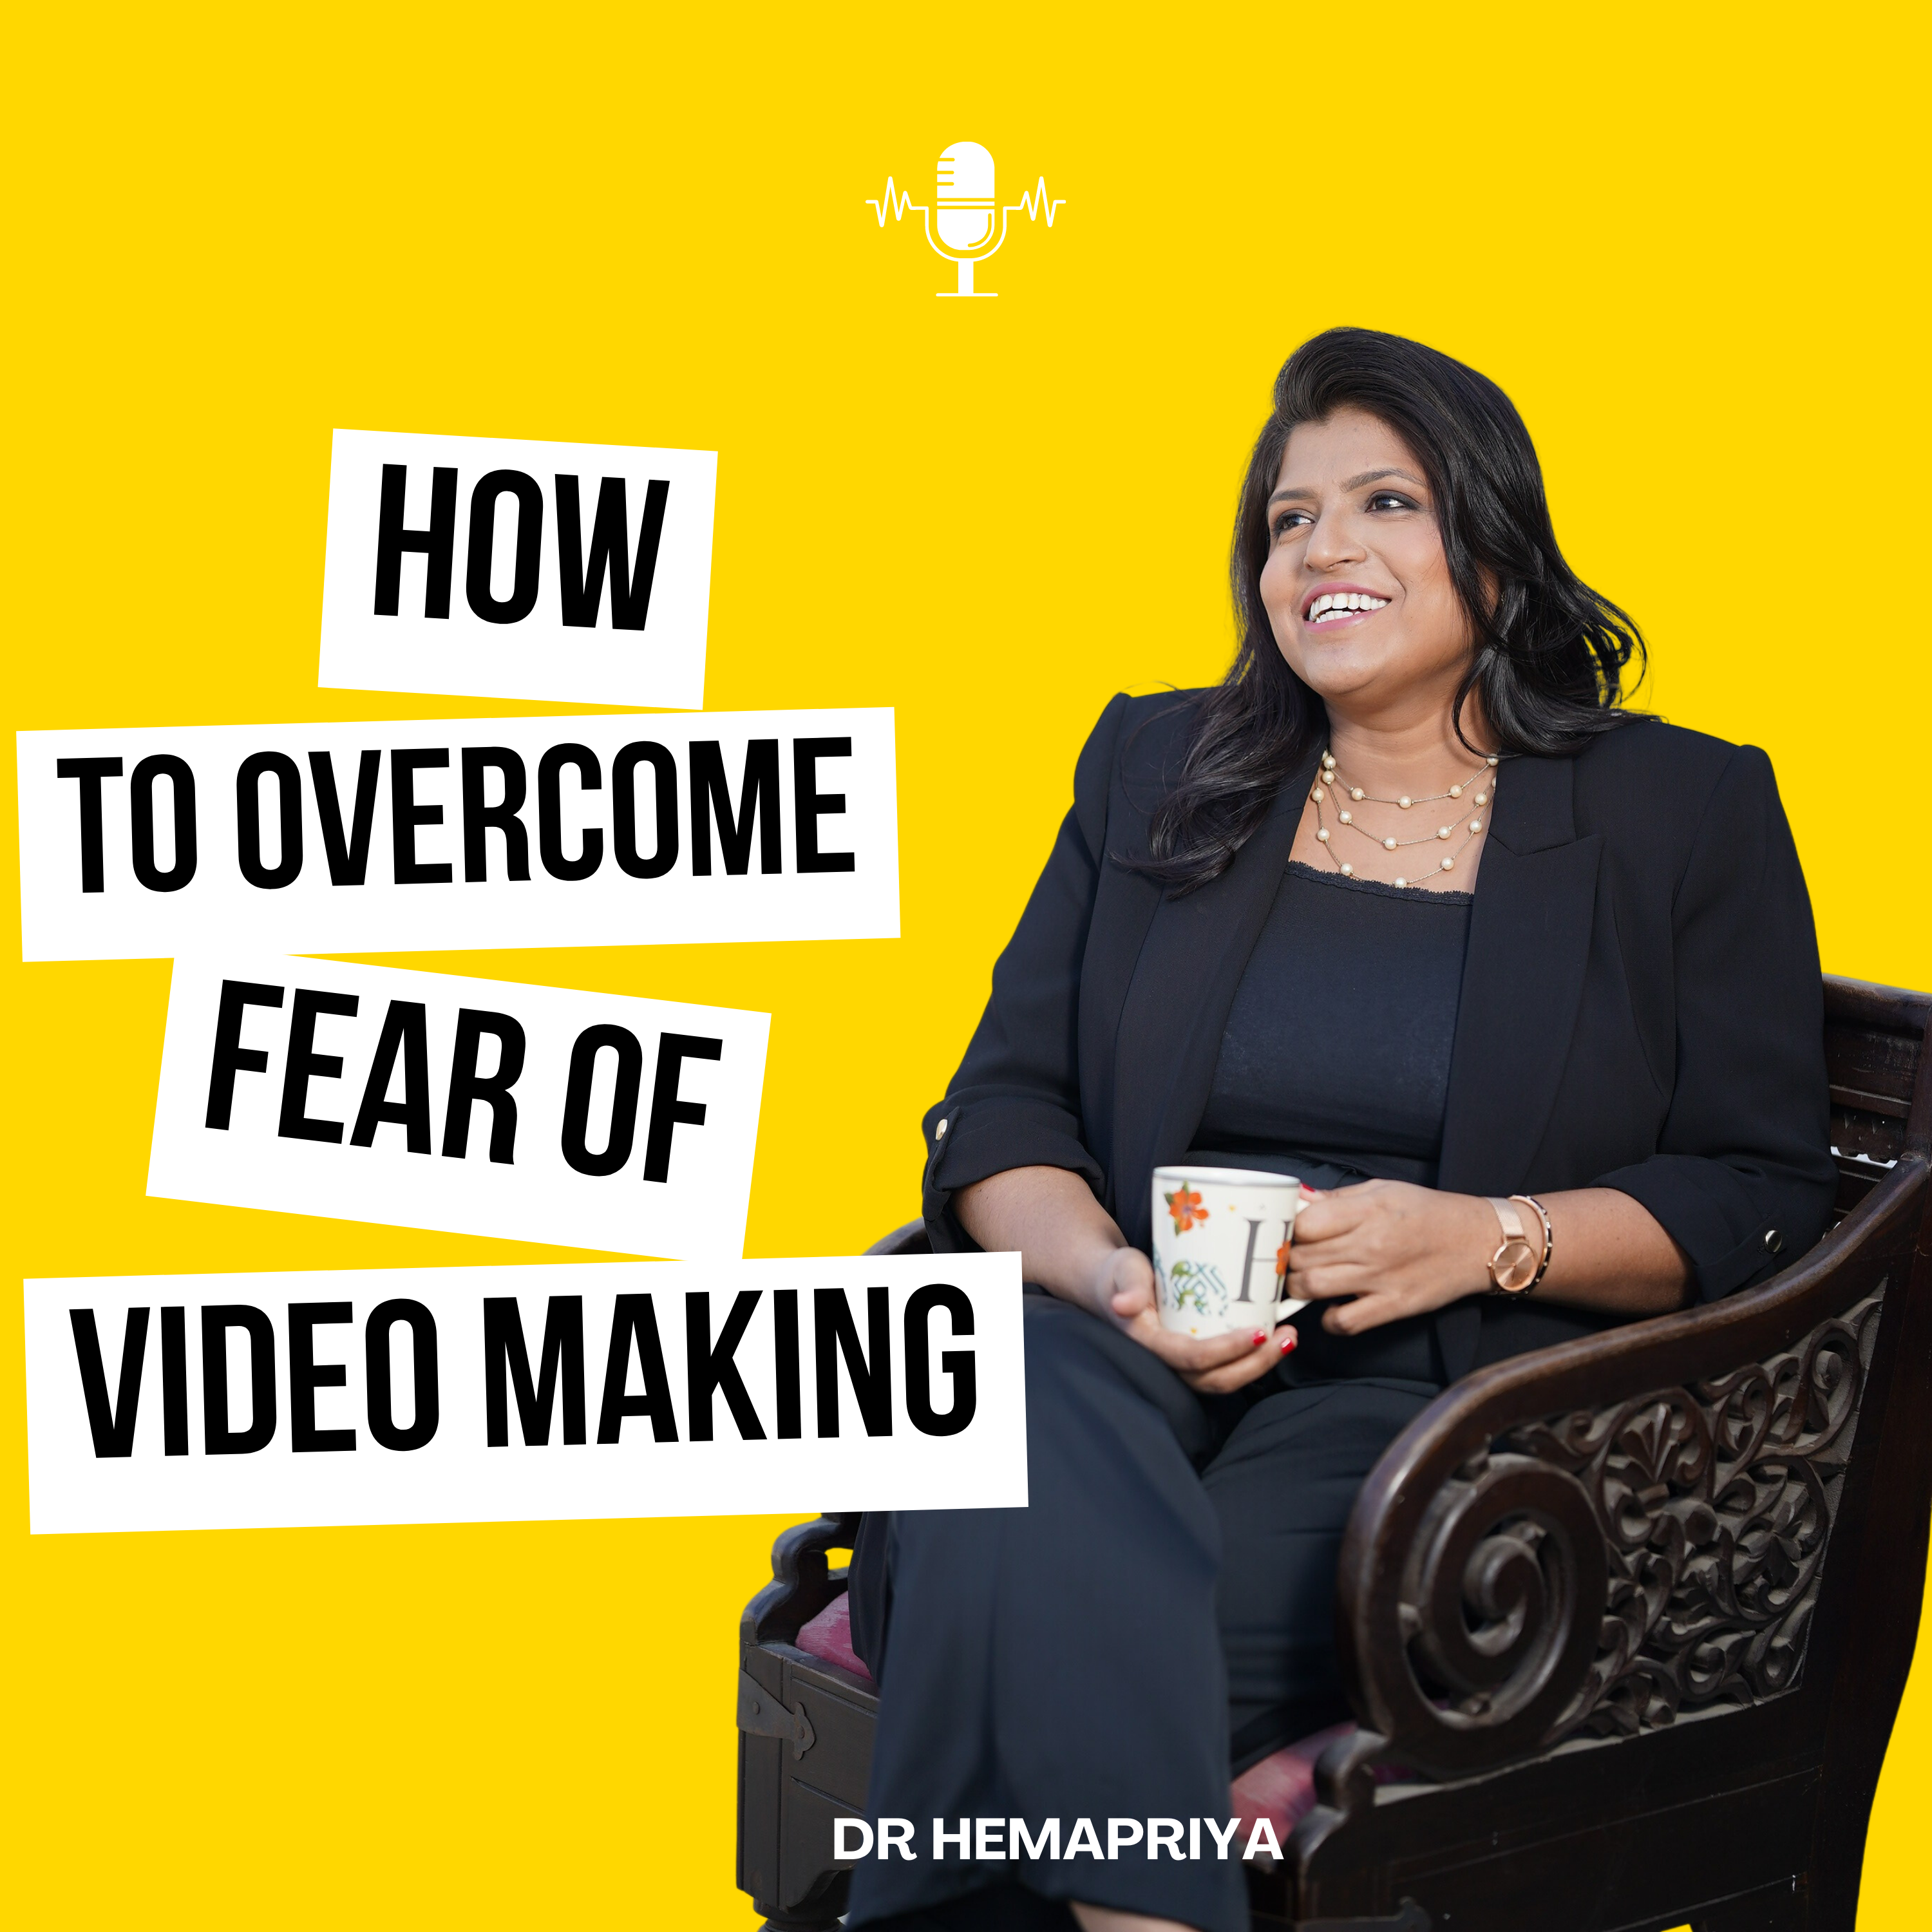 How To Overcome Fear of Video Making